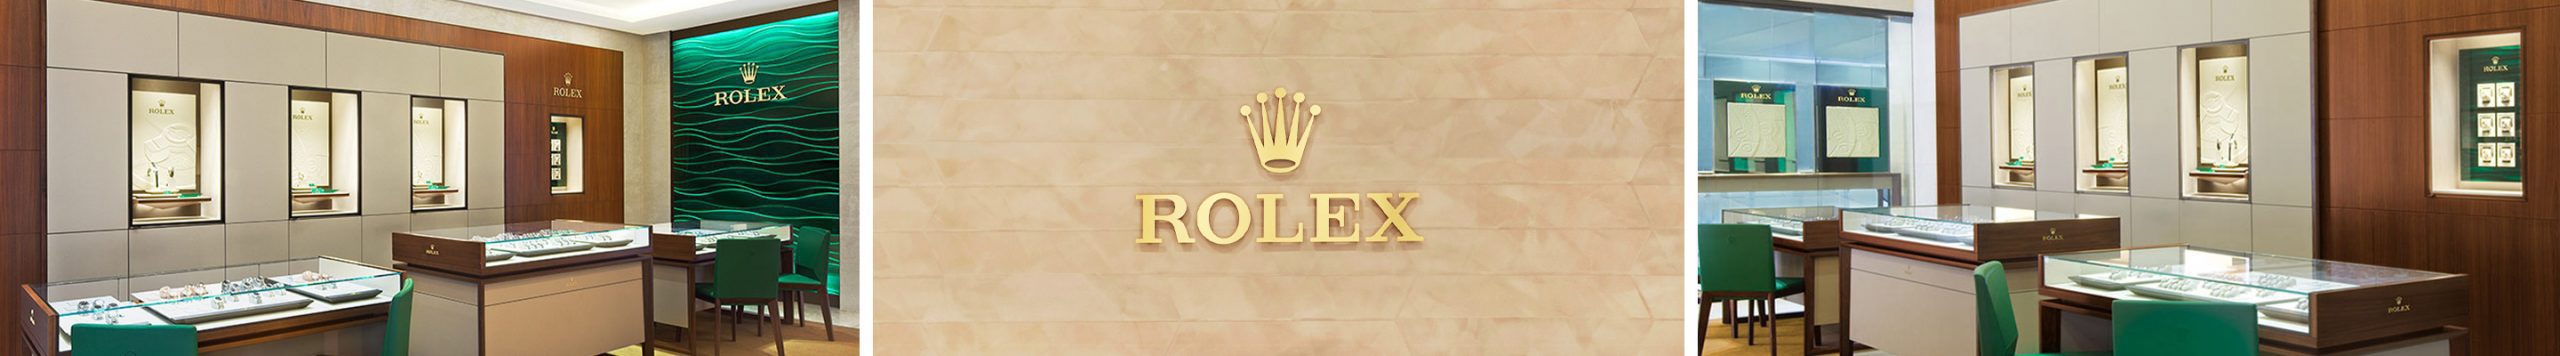 Swee-Cheong-Rolex-Contact-Us-Page-Banner-Desktop-Scaled-1